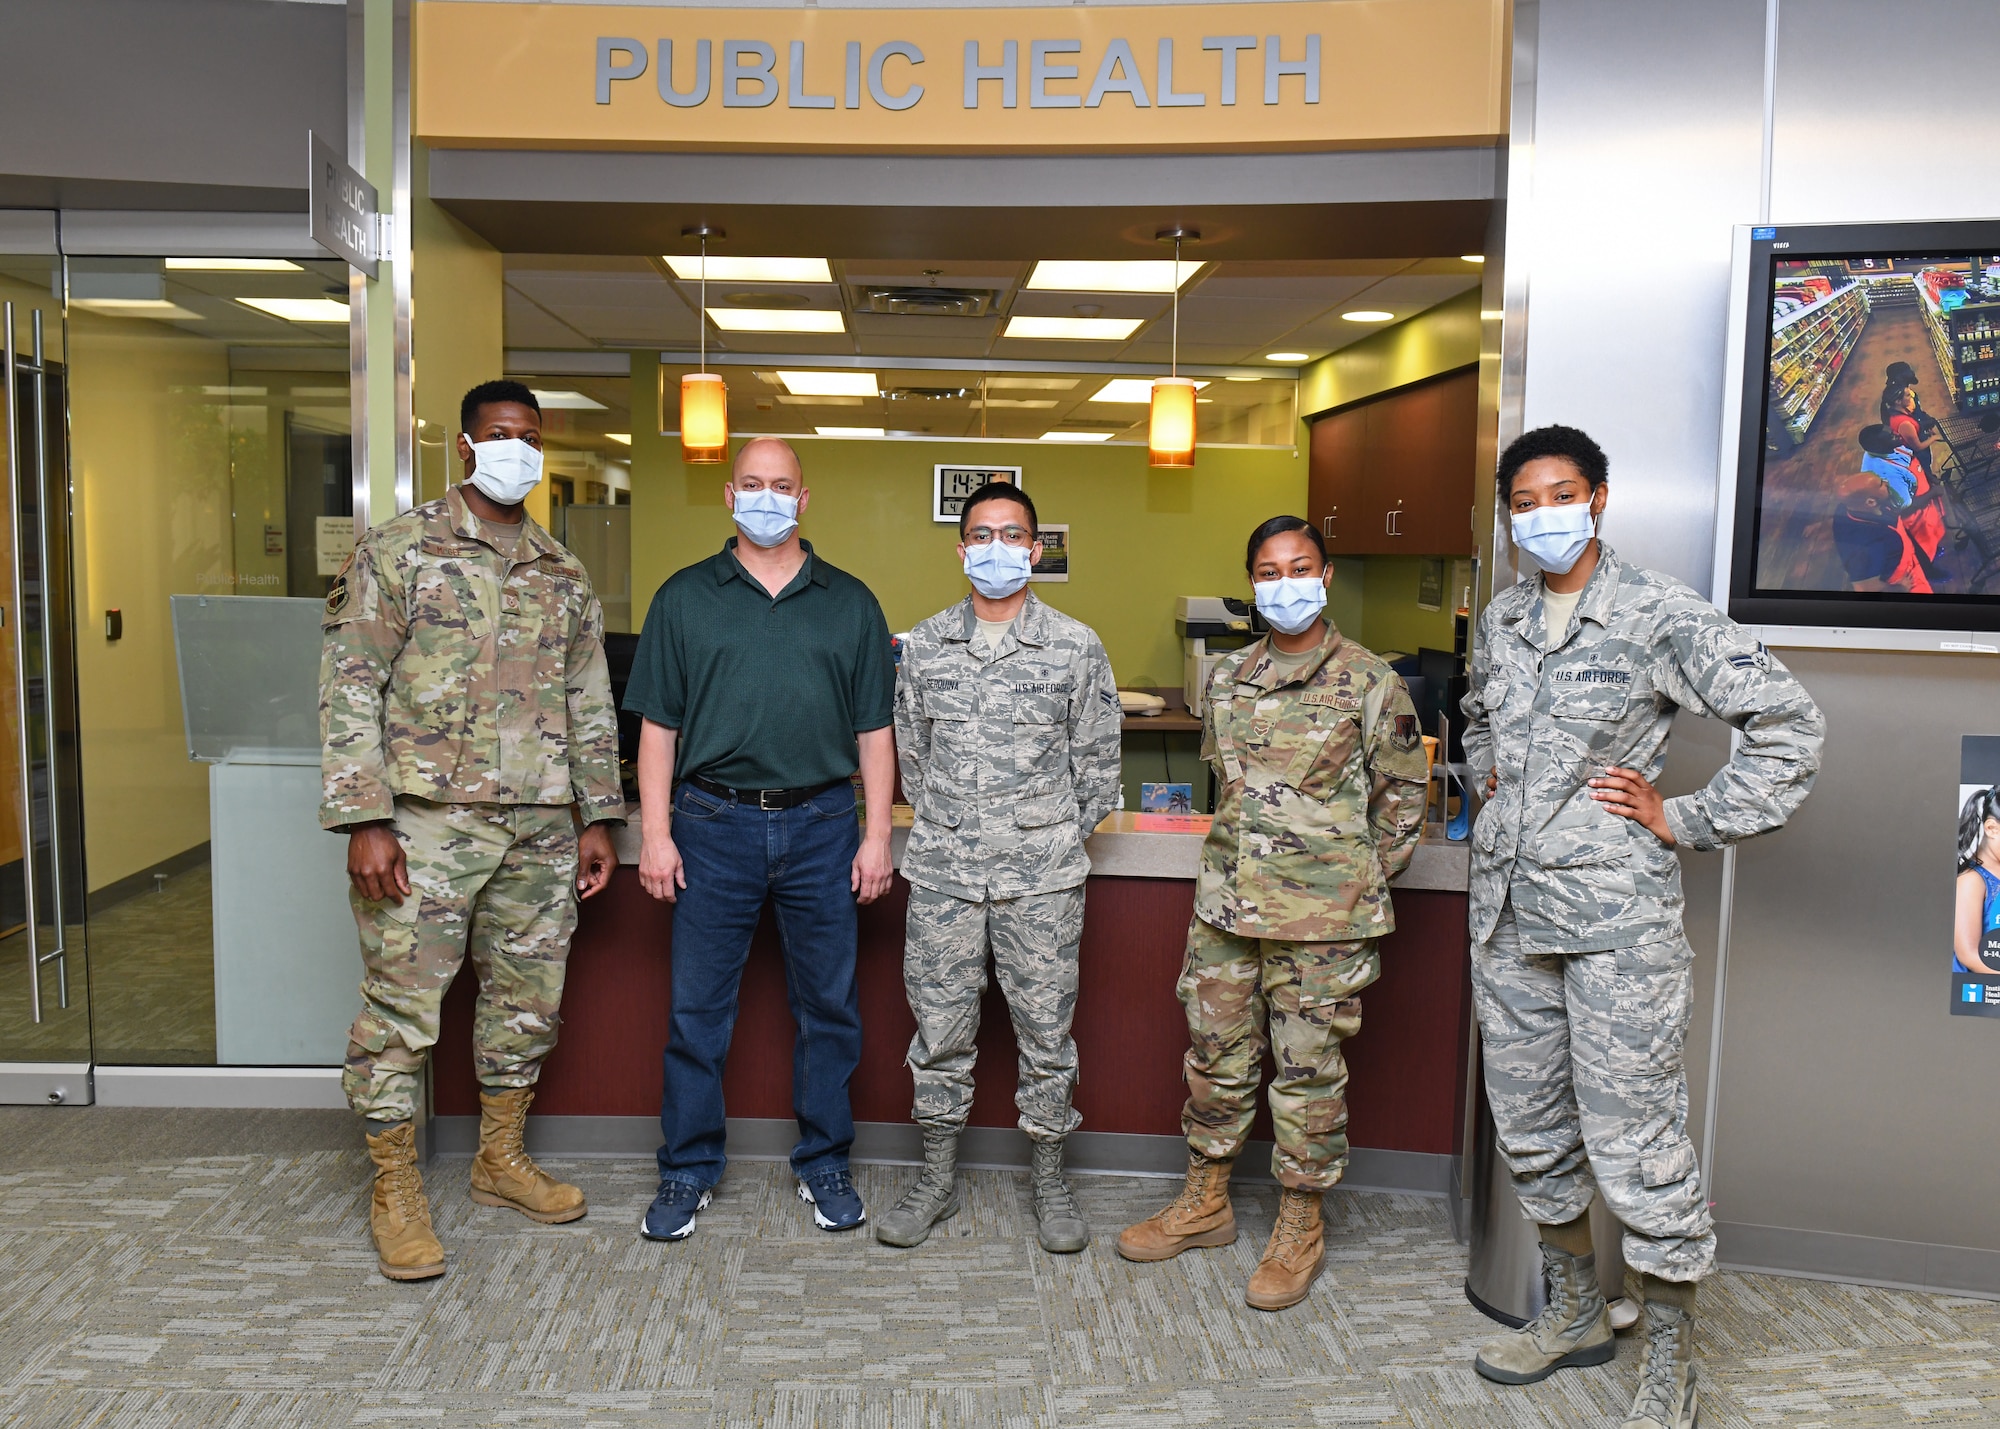 Public health technicians from the 9th Operational Medical Readiness Squadron public health office, pose for a picture at the clinic in Beale Air Force Base, California, April 8, 2020. These Airmen help keep Recce Town safe through education and prevention. (U.S. Air Force photo by Airman 1st Class Luis A. Ruiz-Vazquez)